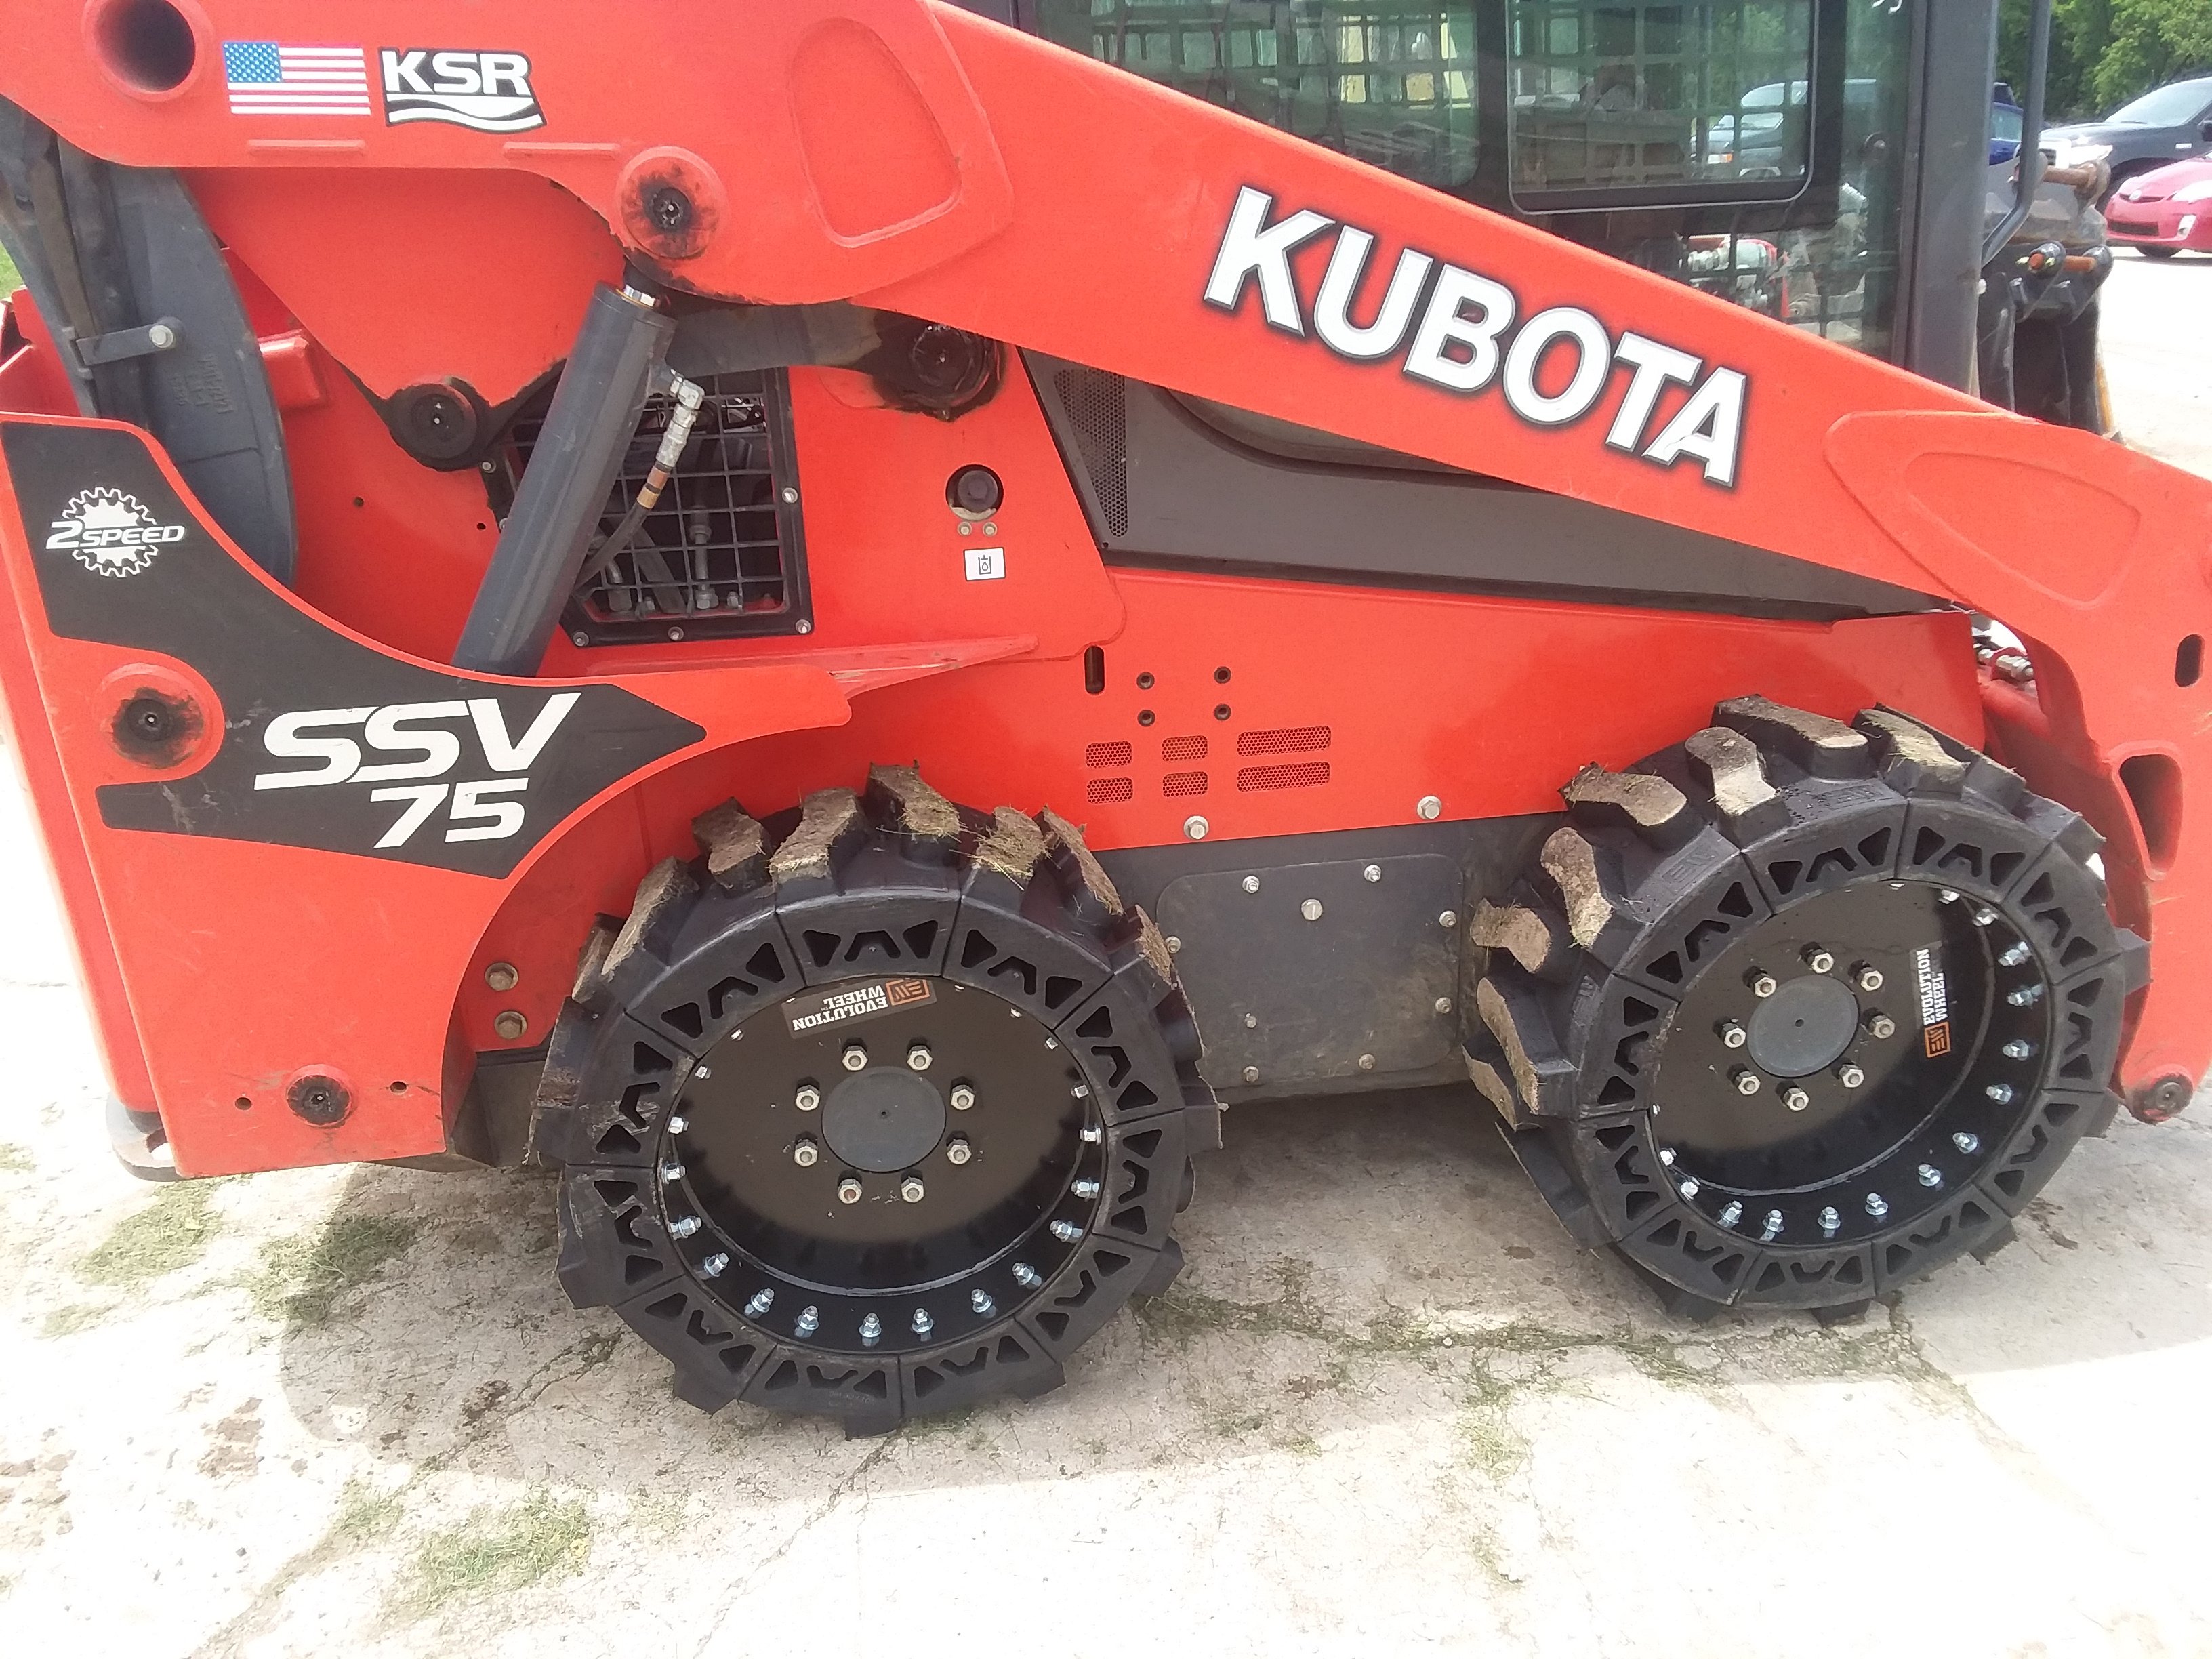 This images shows a red Kubota skid steer using our flat free skid steer tires